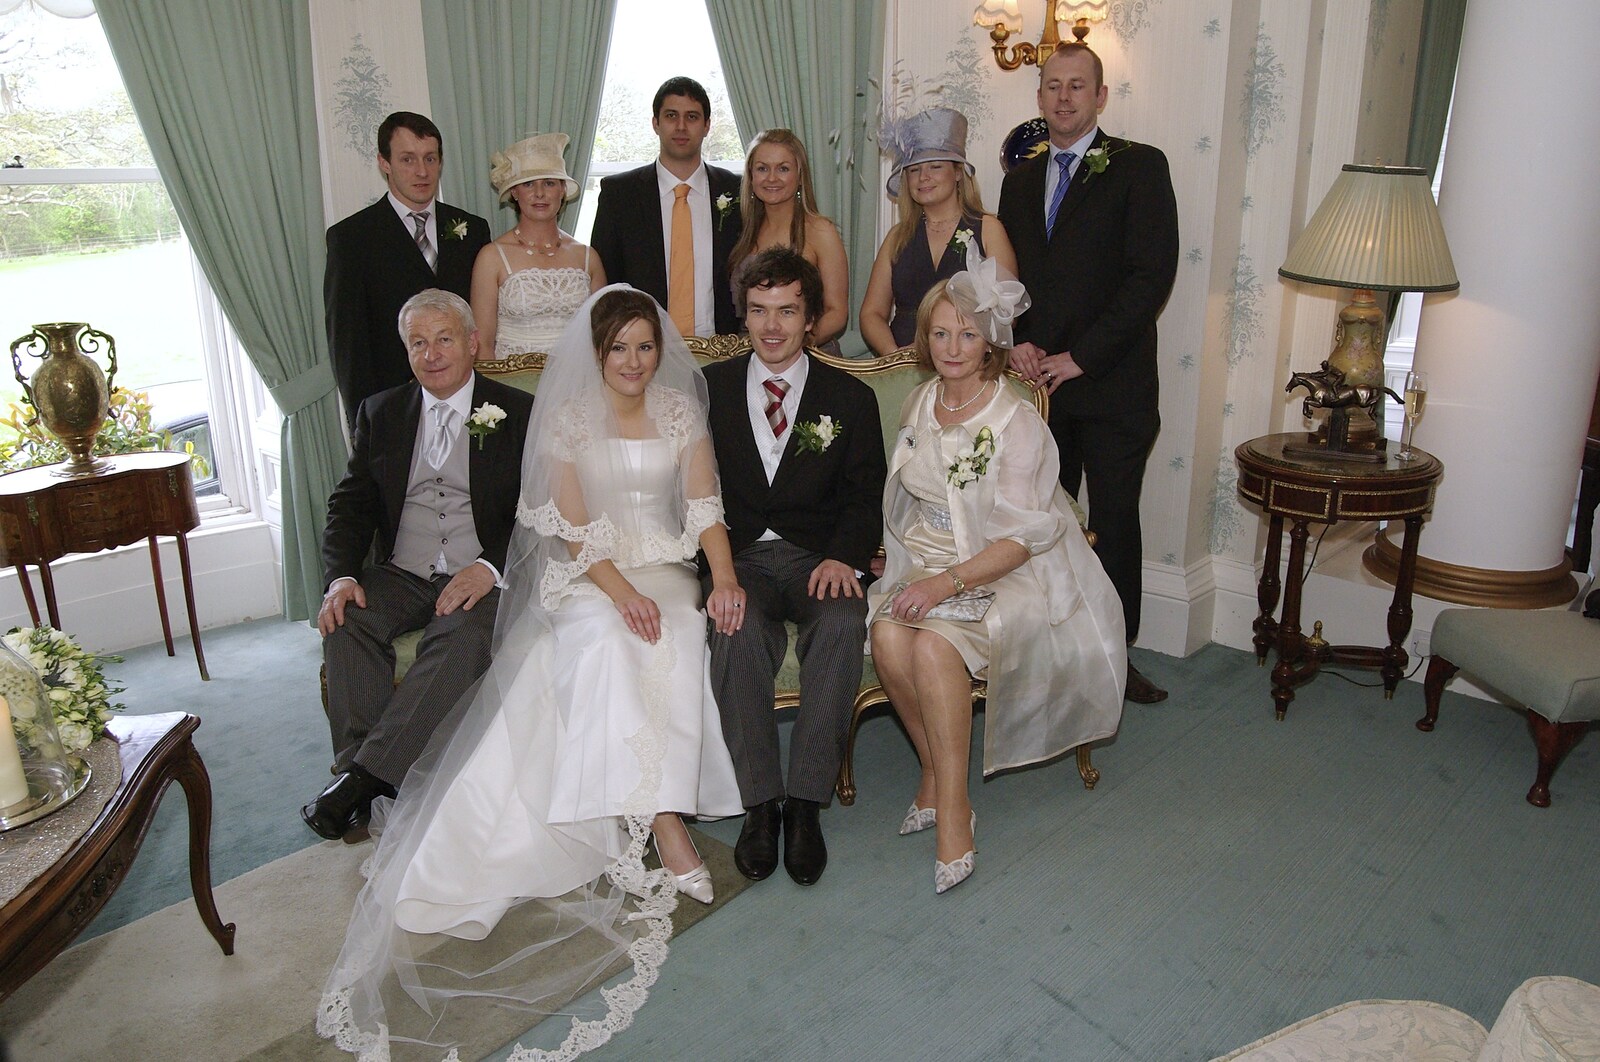 Paul and Jenny's Wedding, Tralee, County Kerry, Ireland - 3rd May 2008: A classic wedding photo